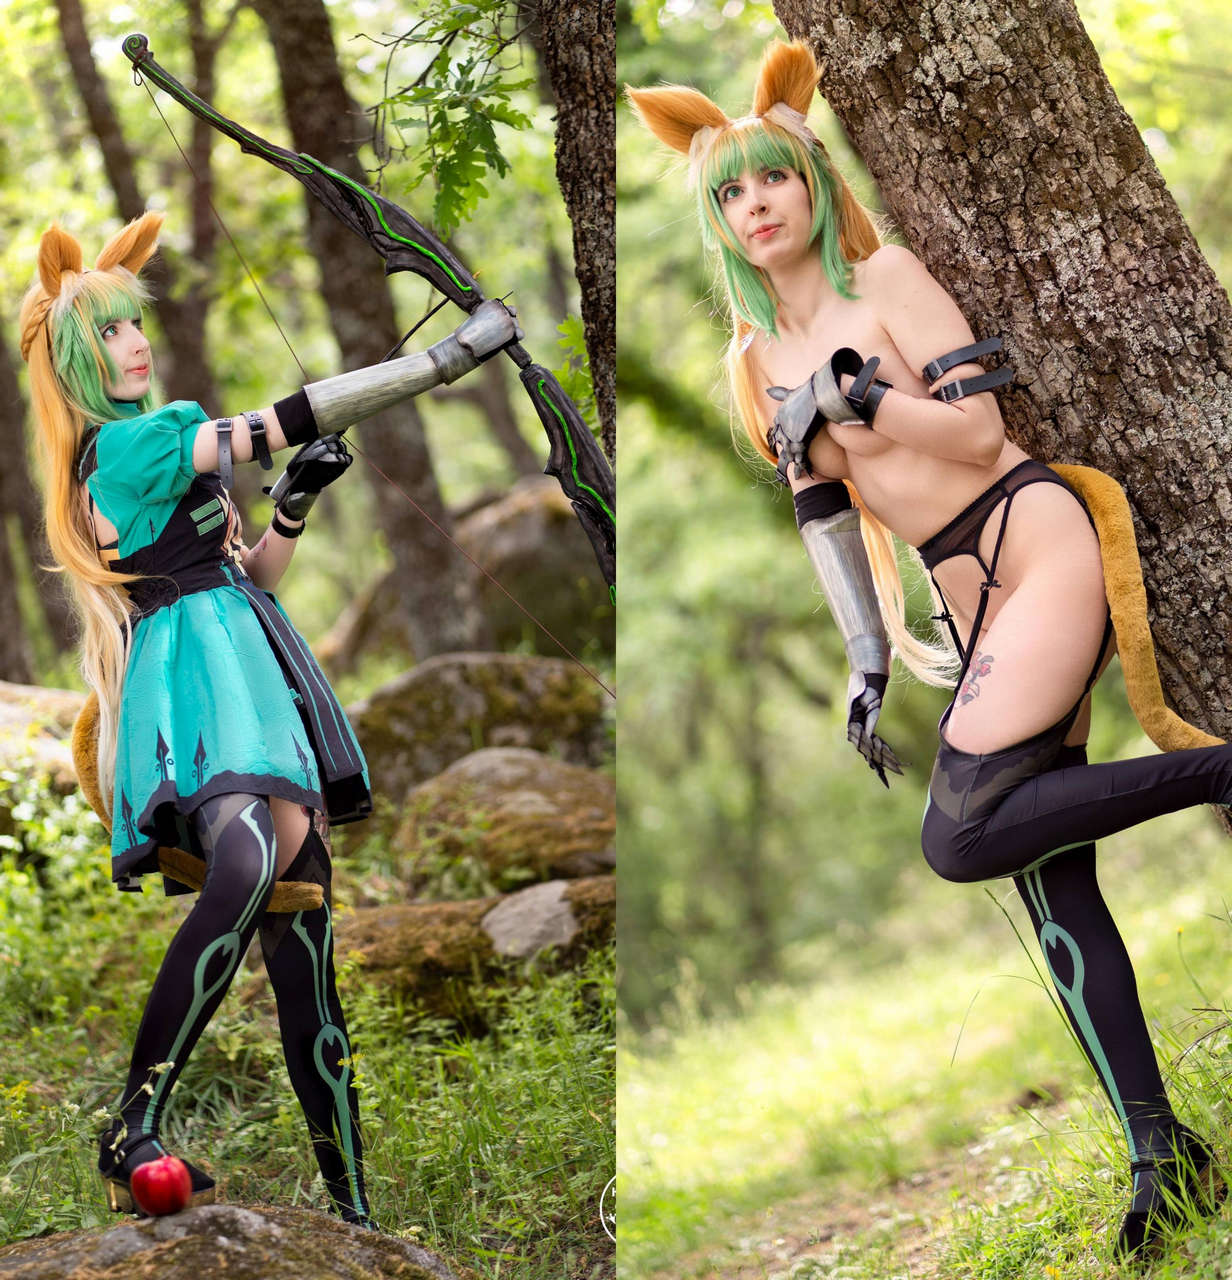 Atalanta Full Nude In The Forest Props Are Selfmade Fate Go Kerocch